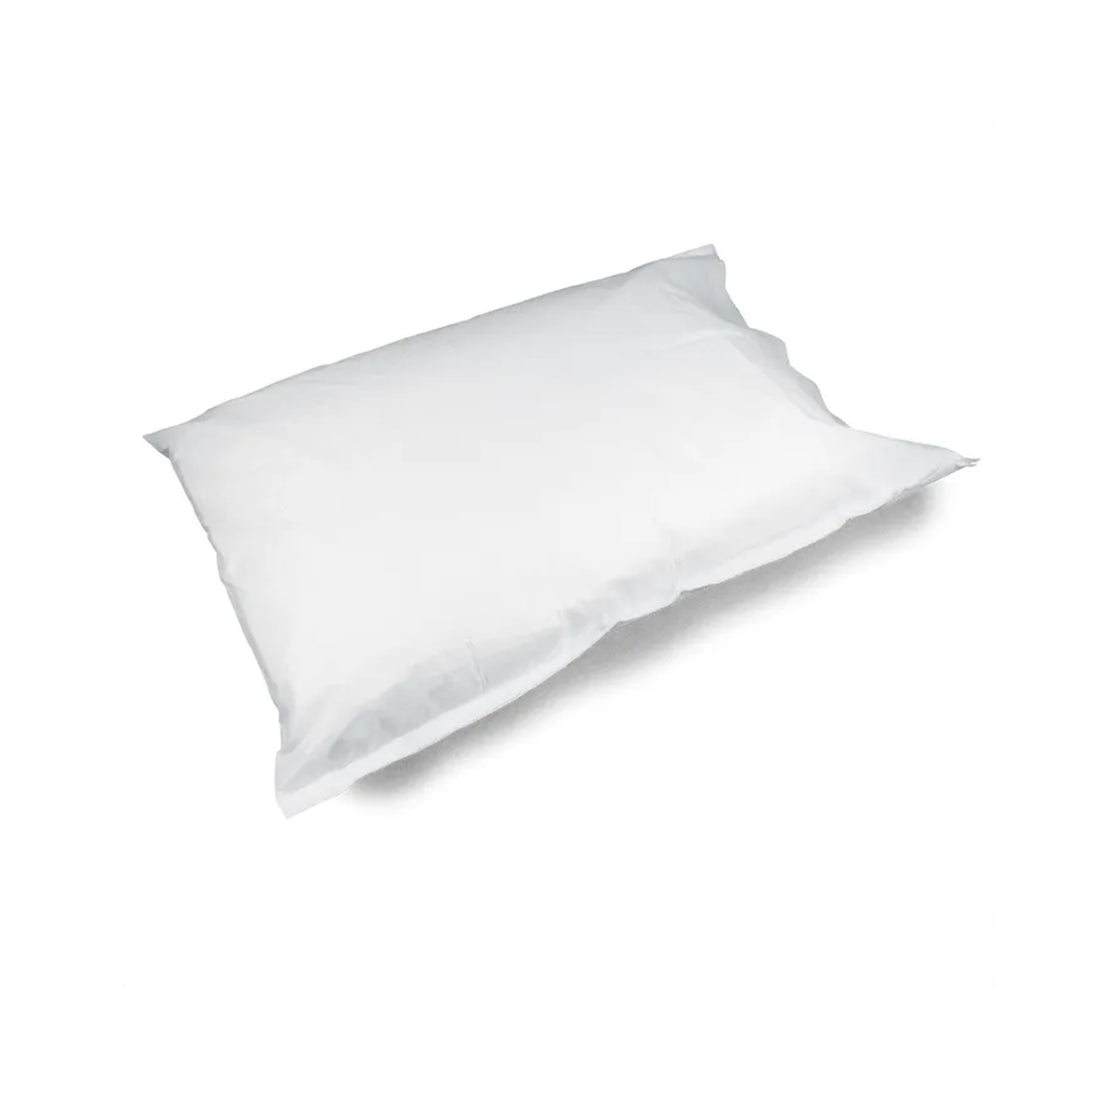 Pillow Case Covers